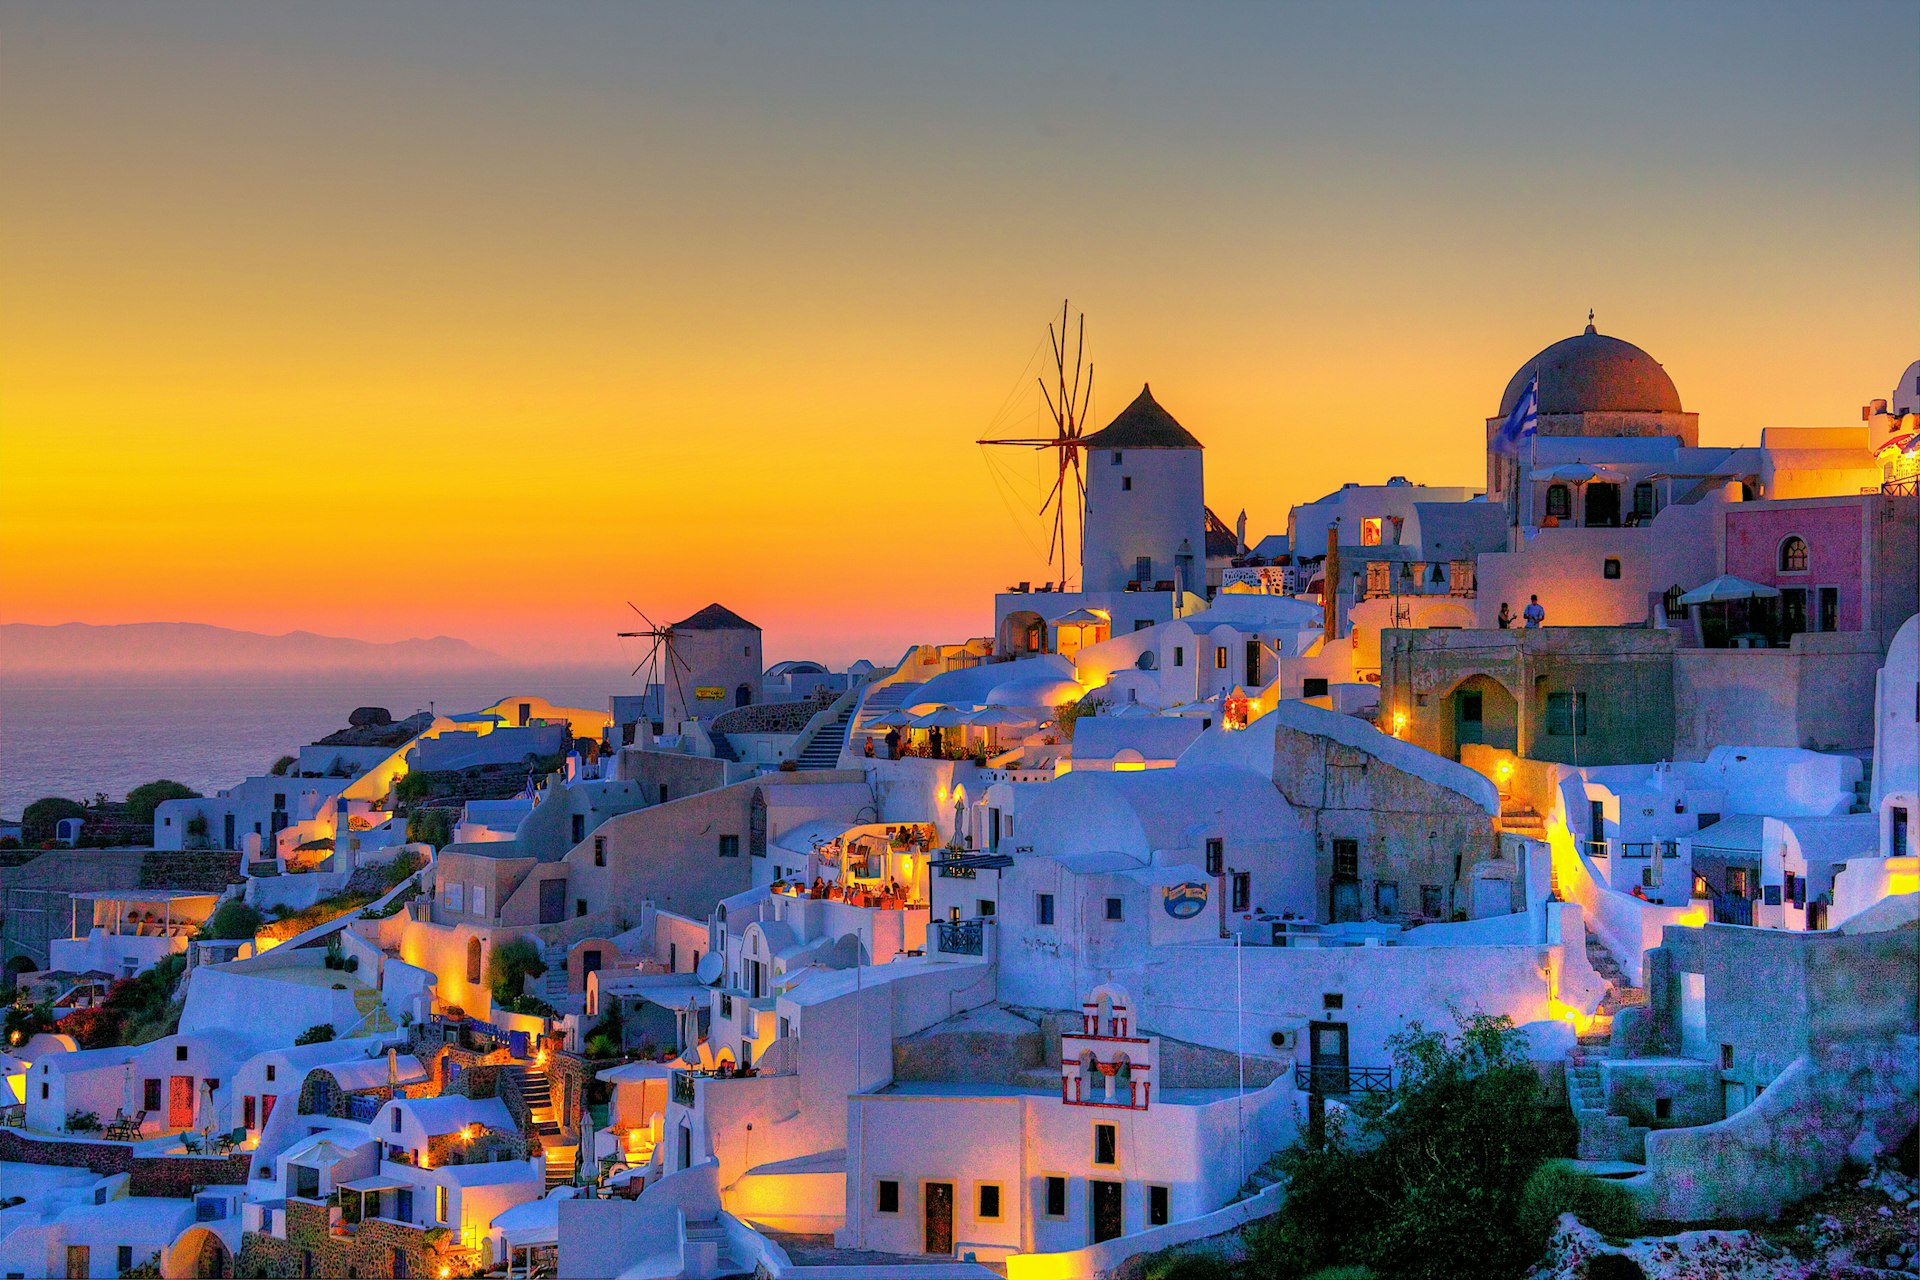 A magical Santorini sunset over the white-washed houses in Oia